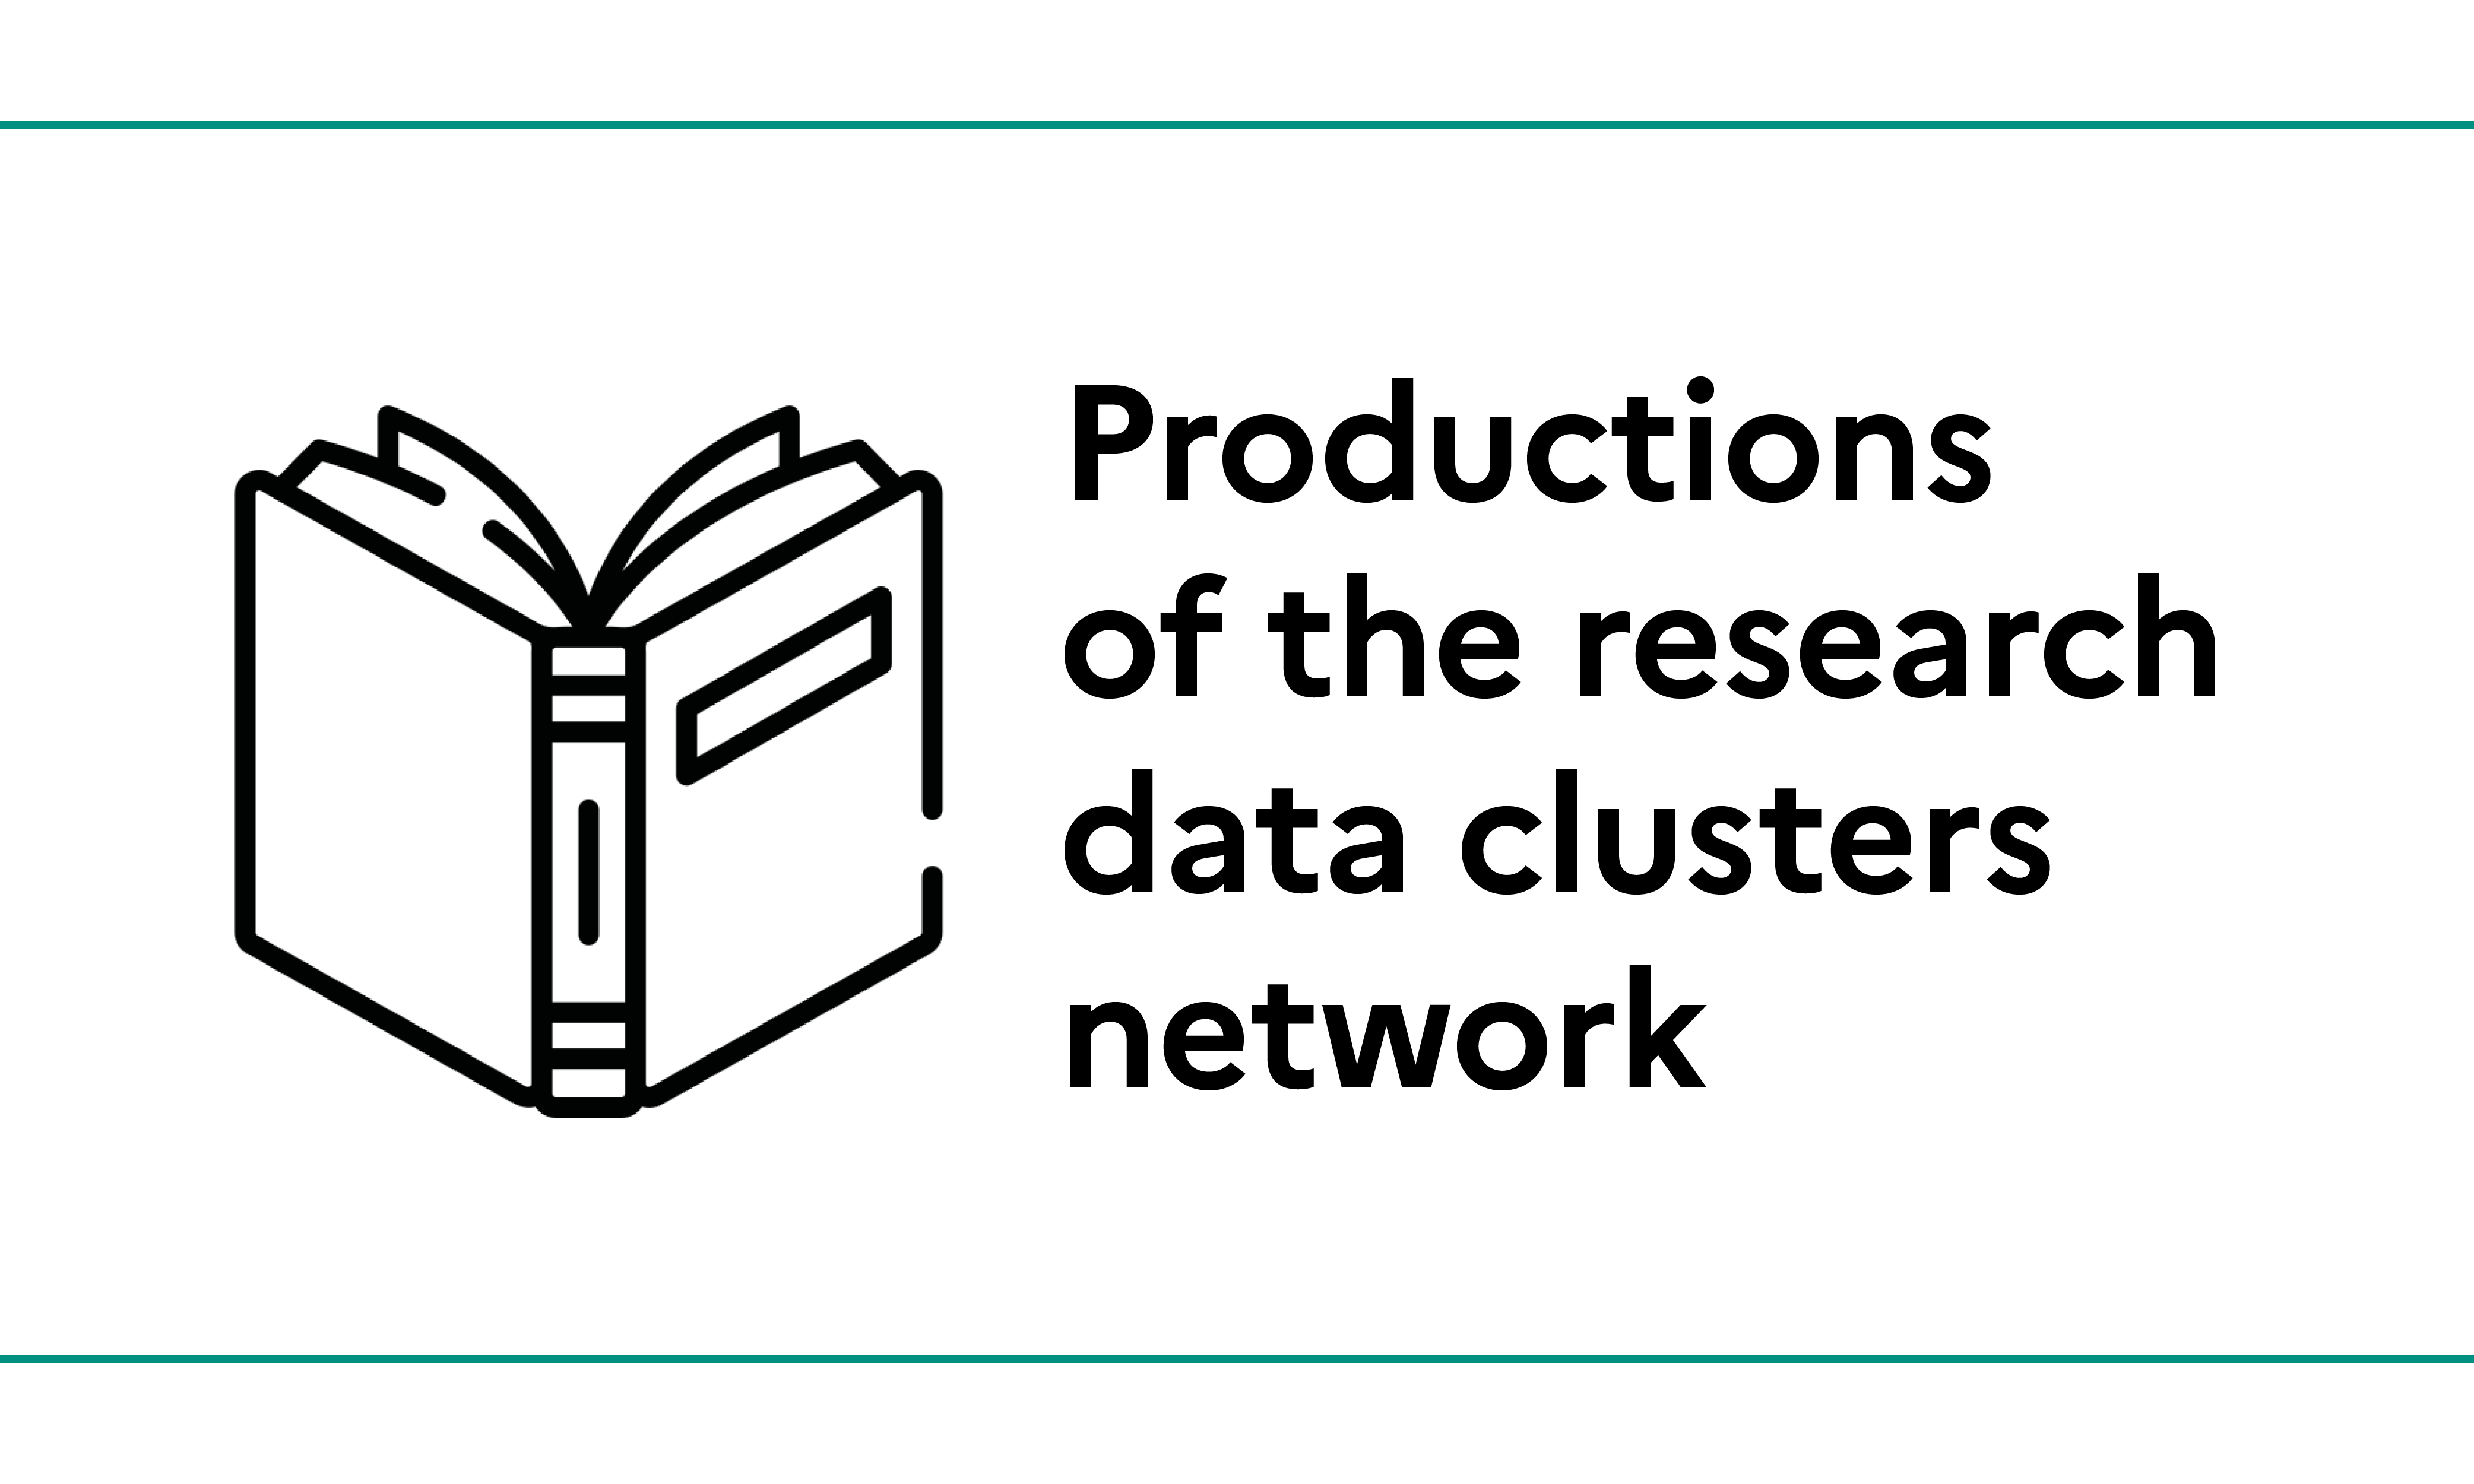 Discover the productions of the research data clusters network